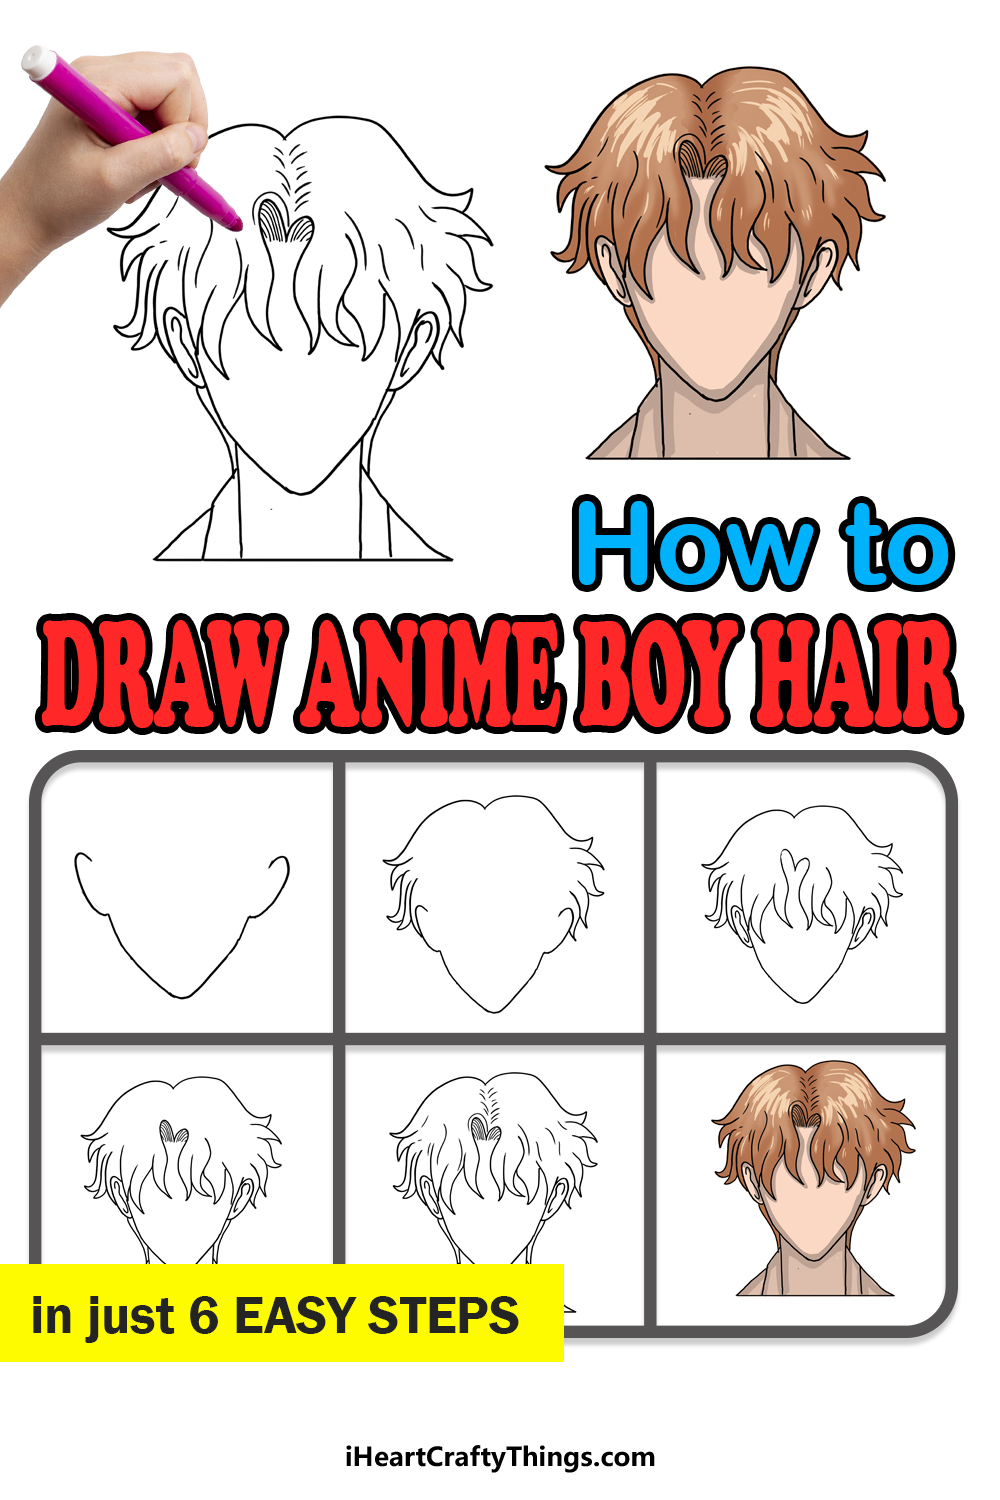 How to Draw Anime Boys Hair step by step guide